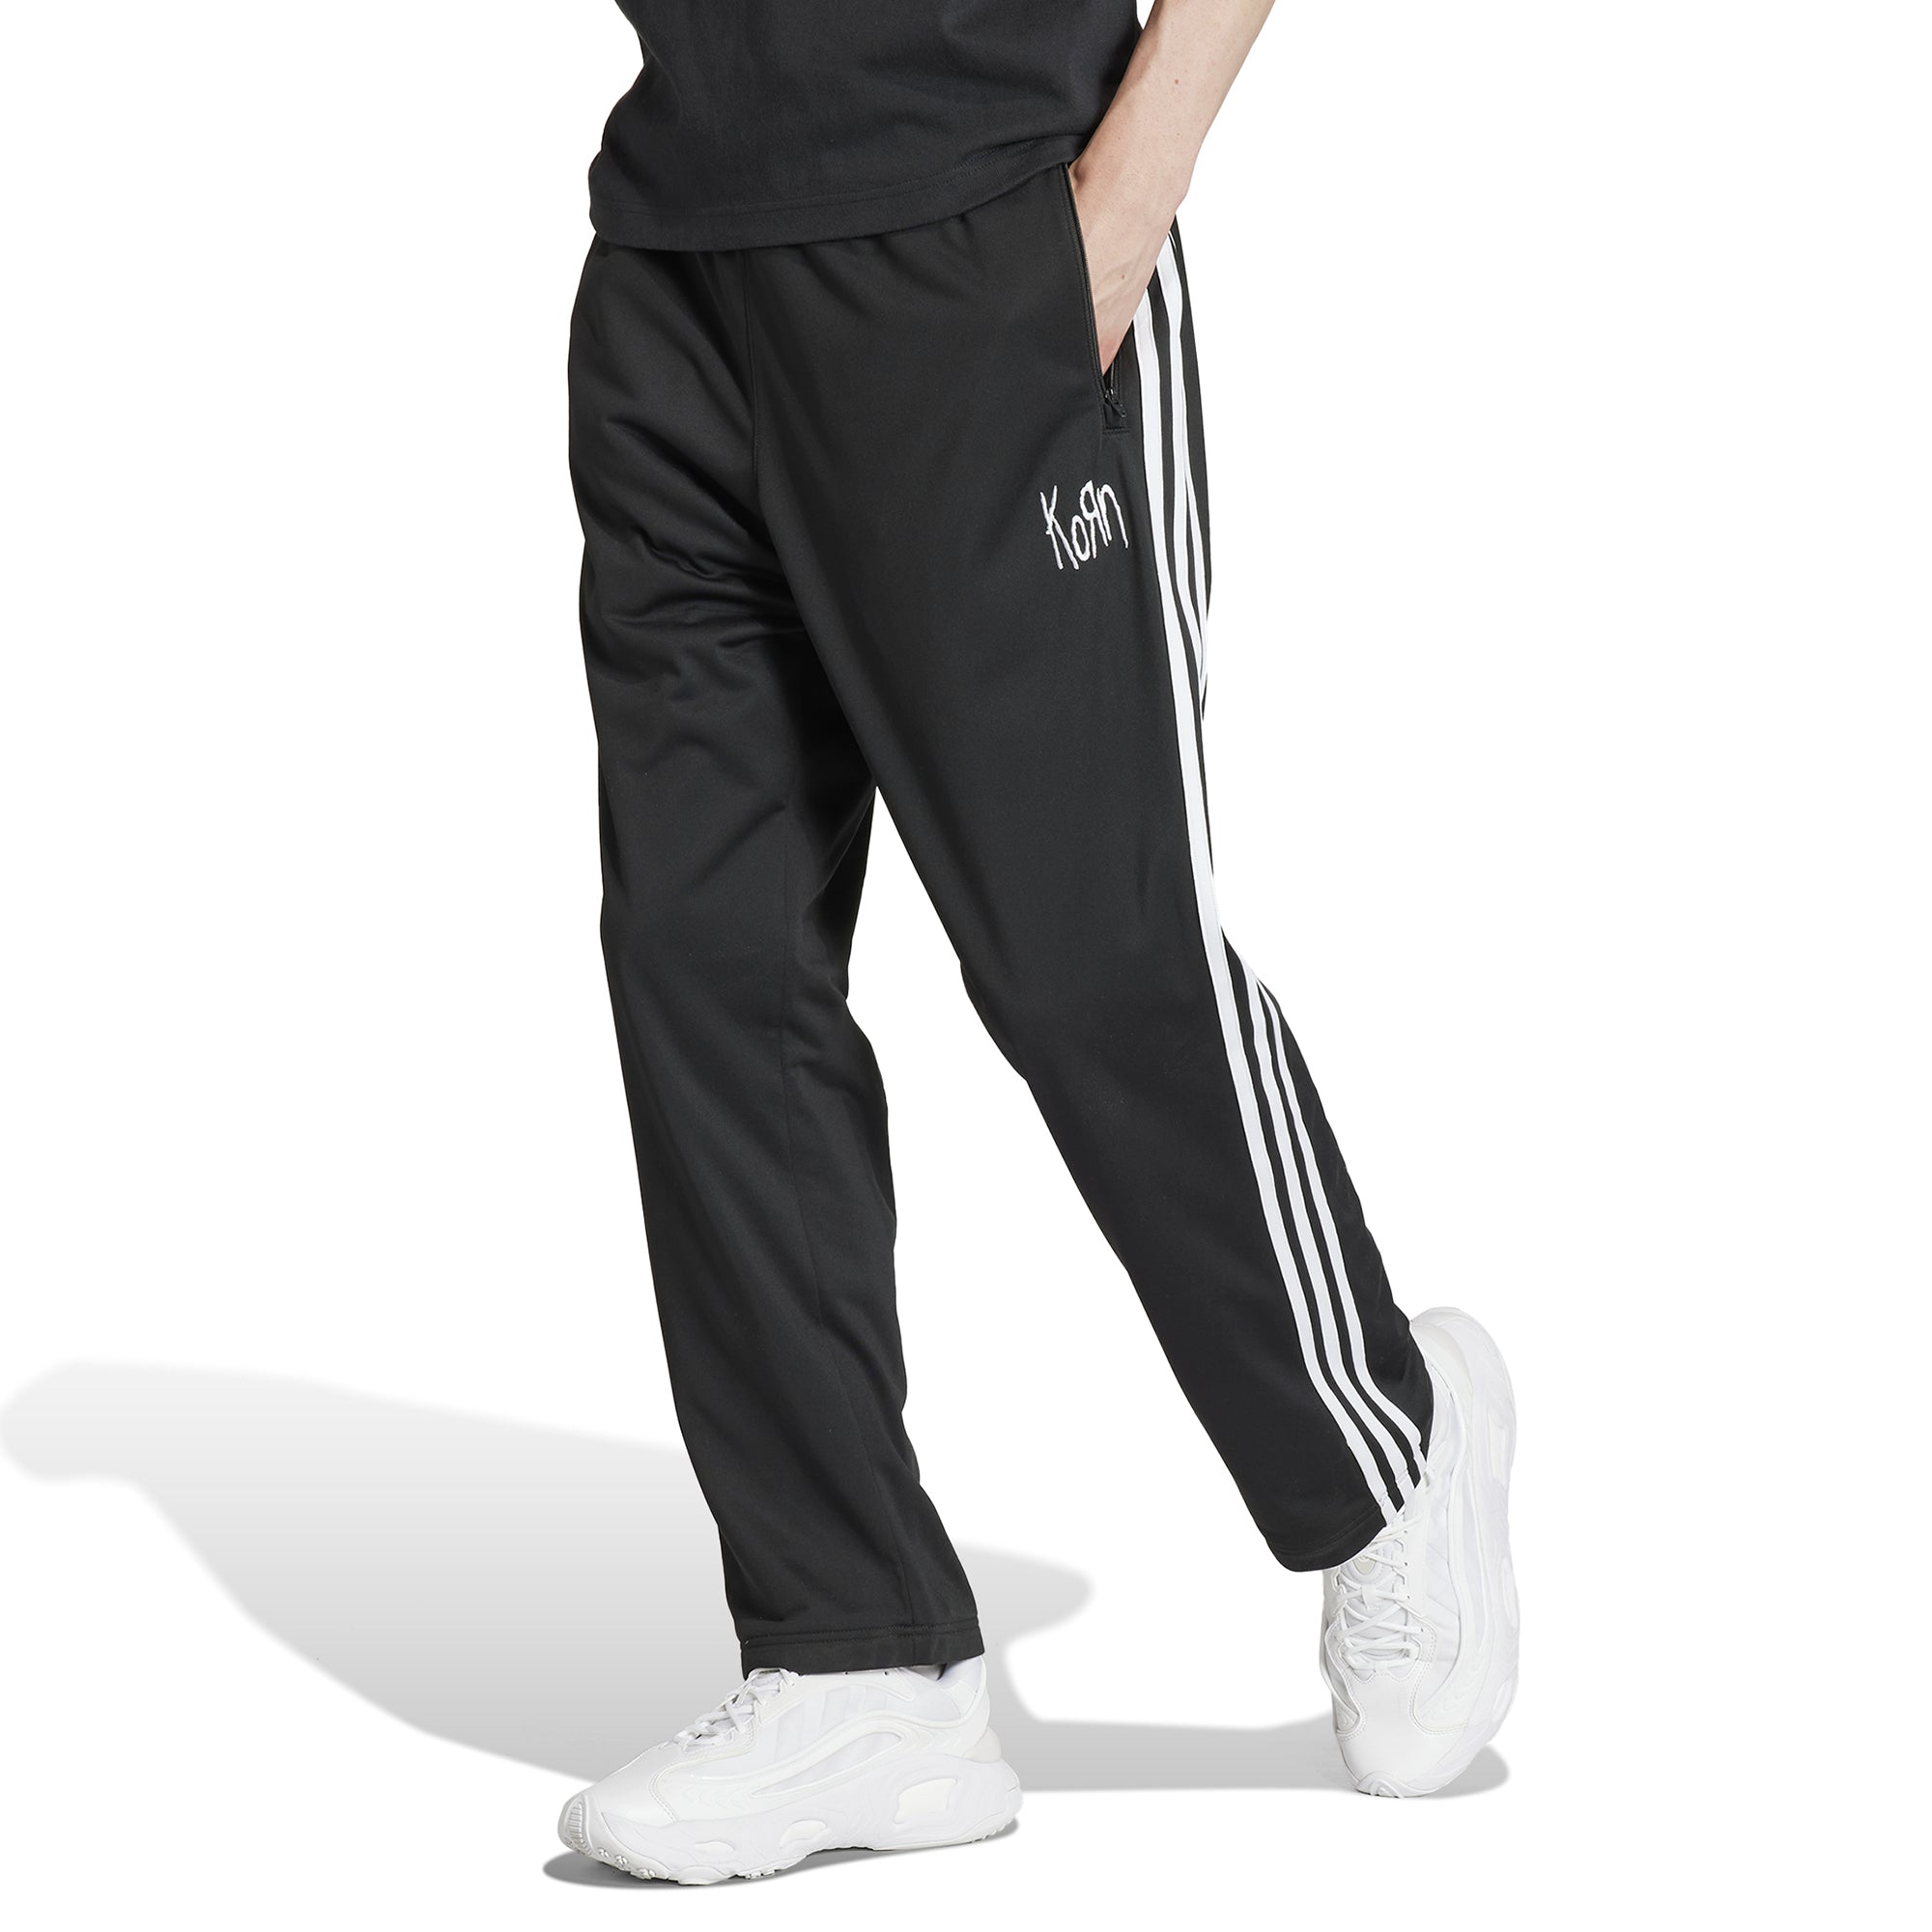 Lacoste Sport Tracksuit Pants White at CareOfCarl.com